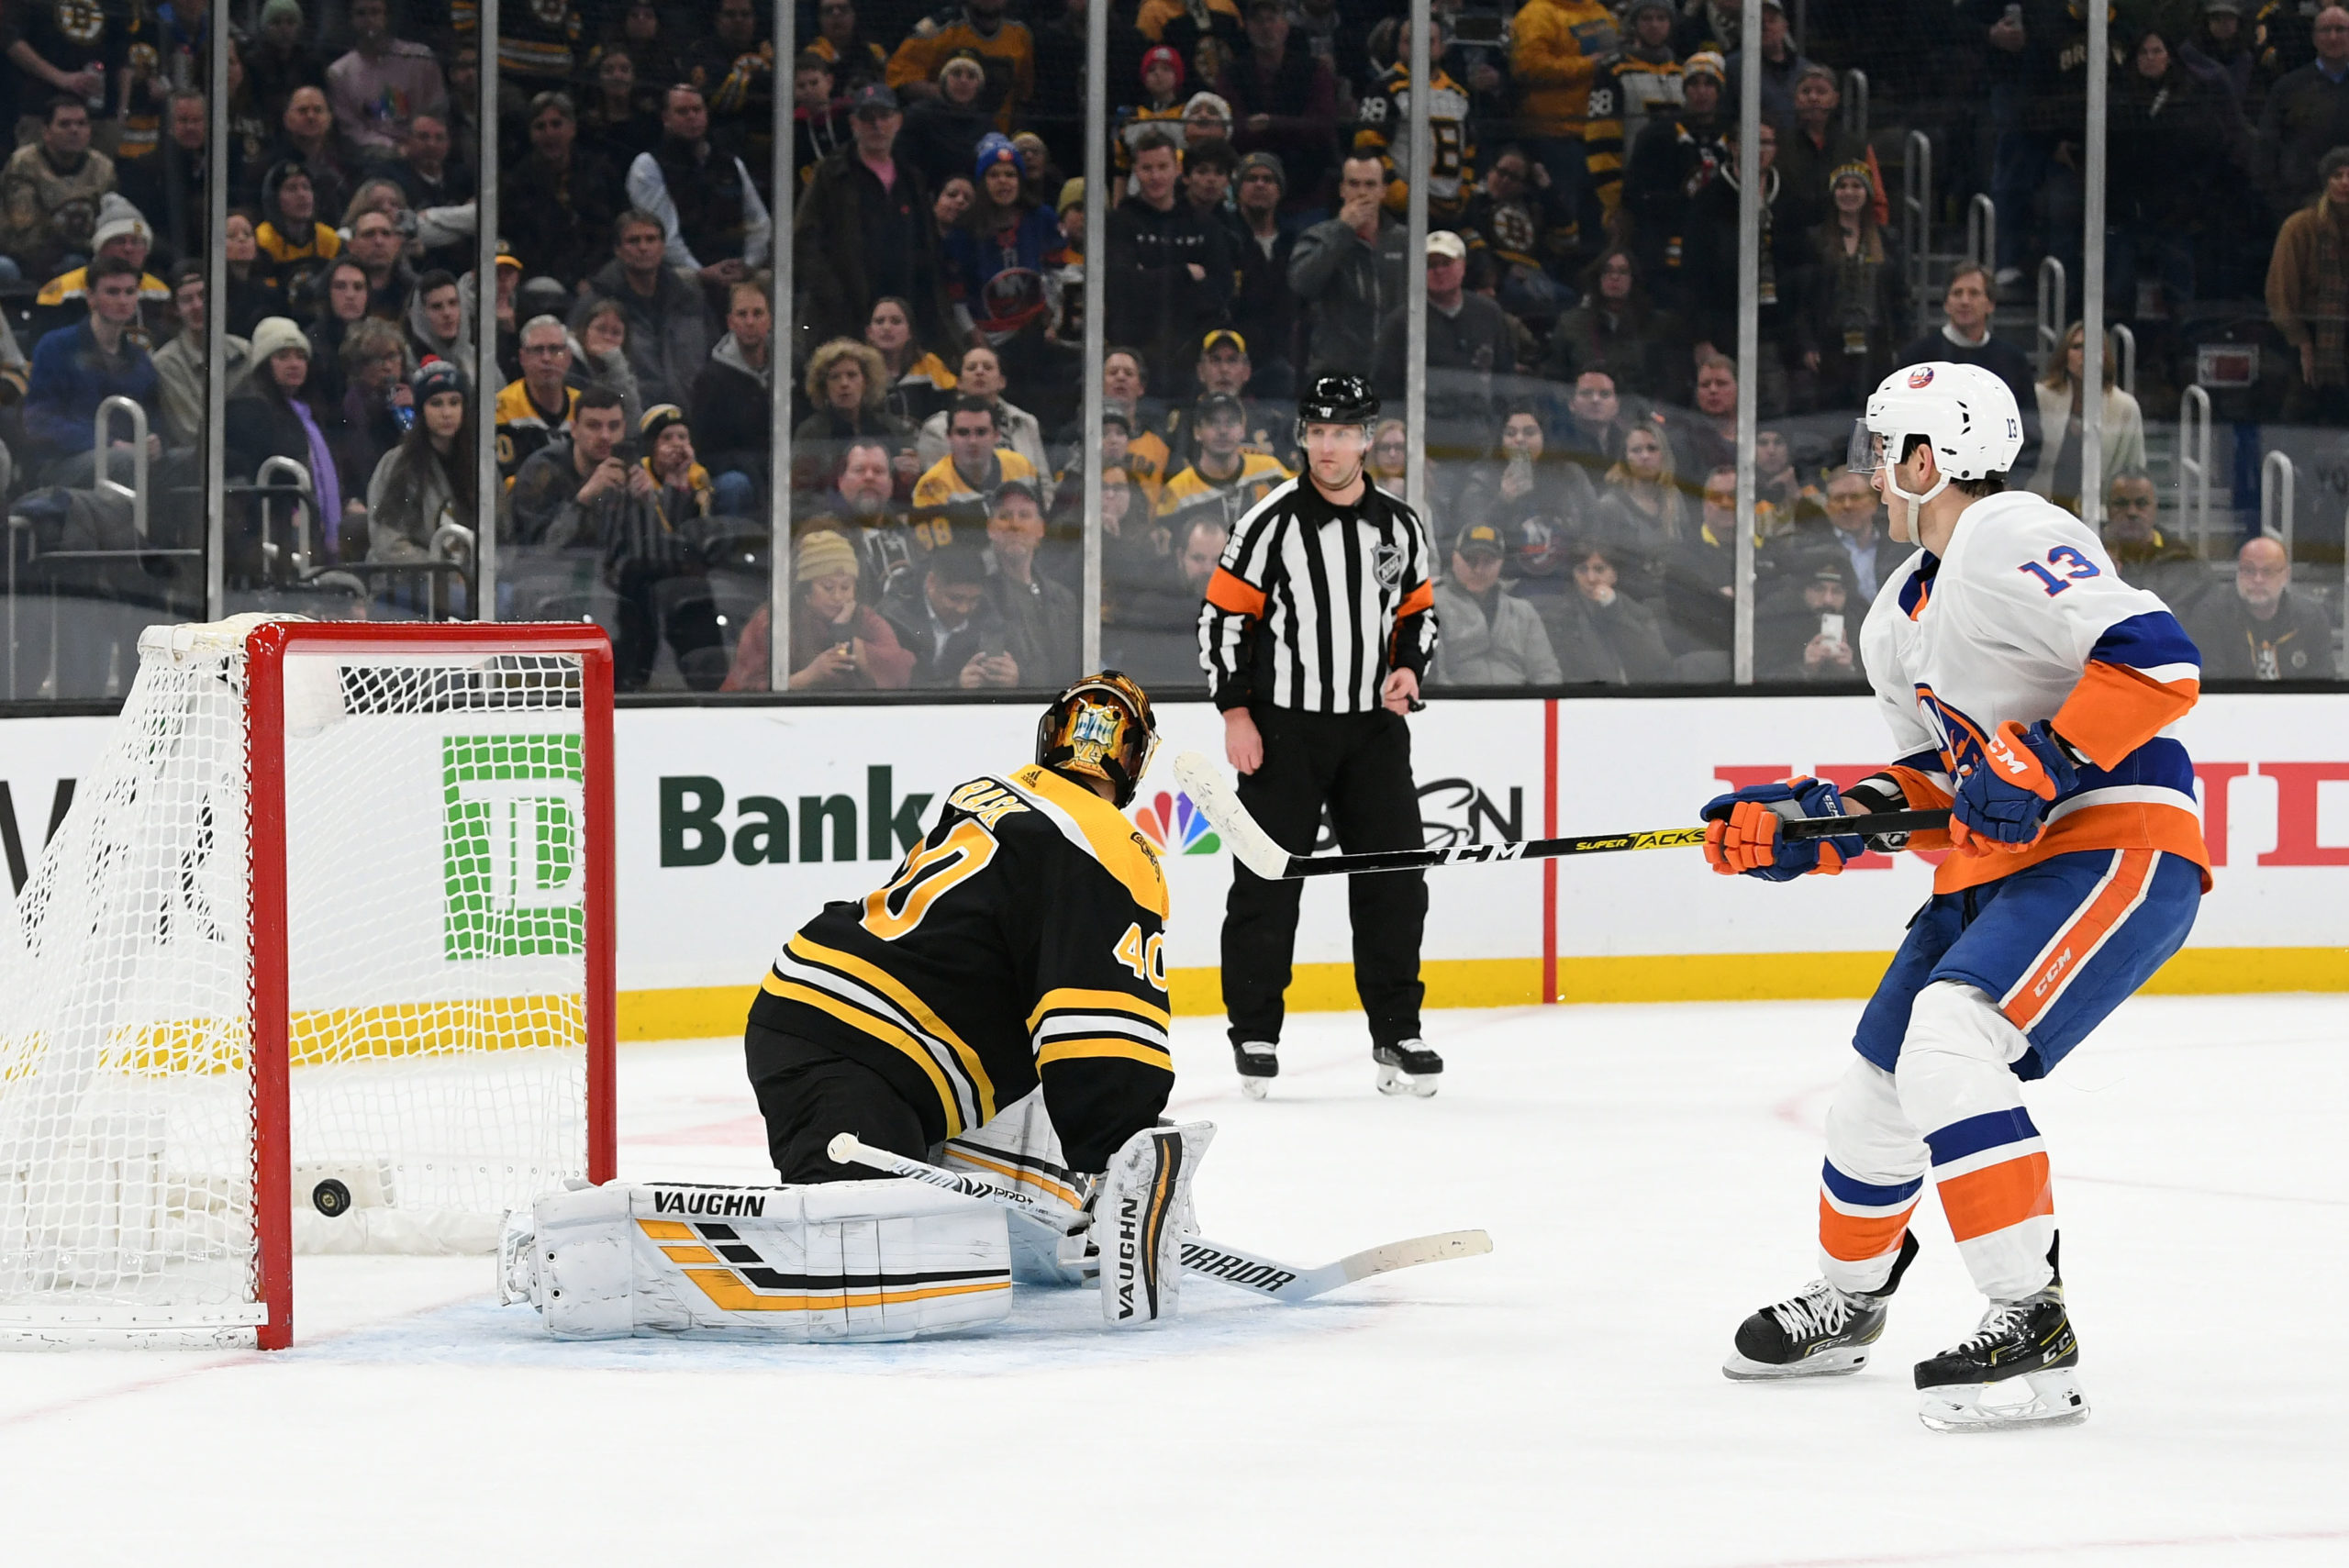 Shootouts Remain a Weakness as Bruins Fall to Isles